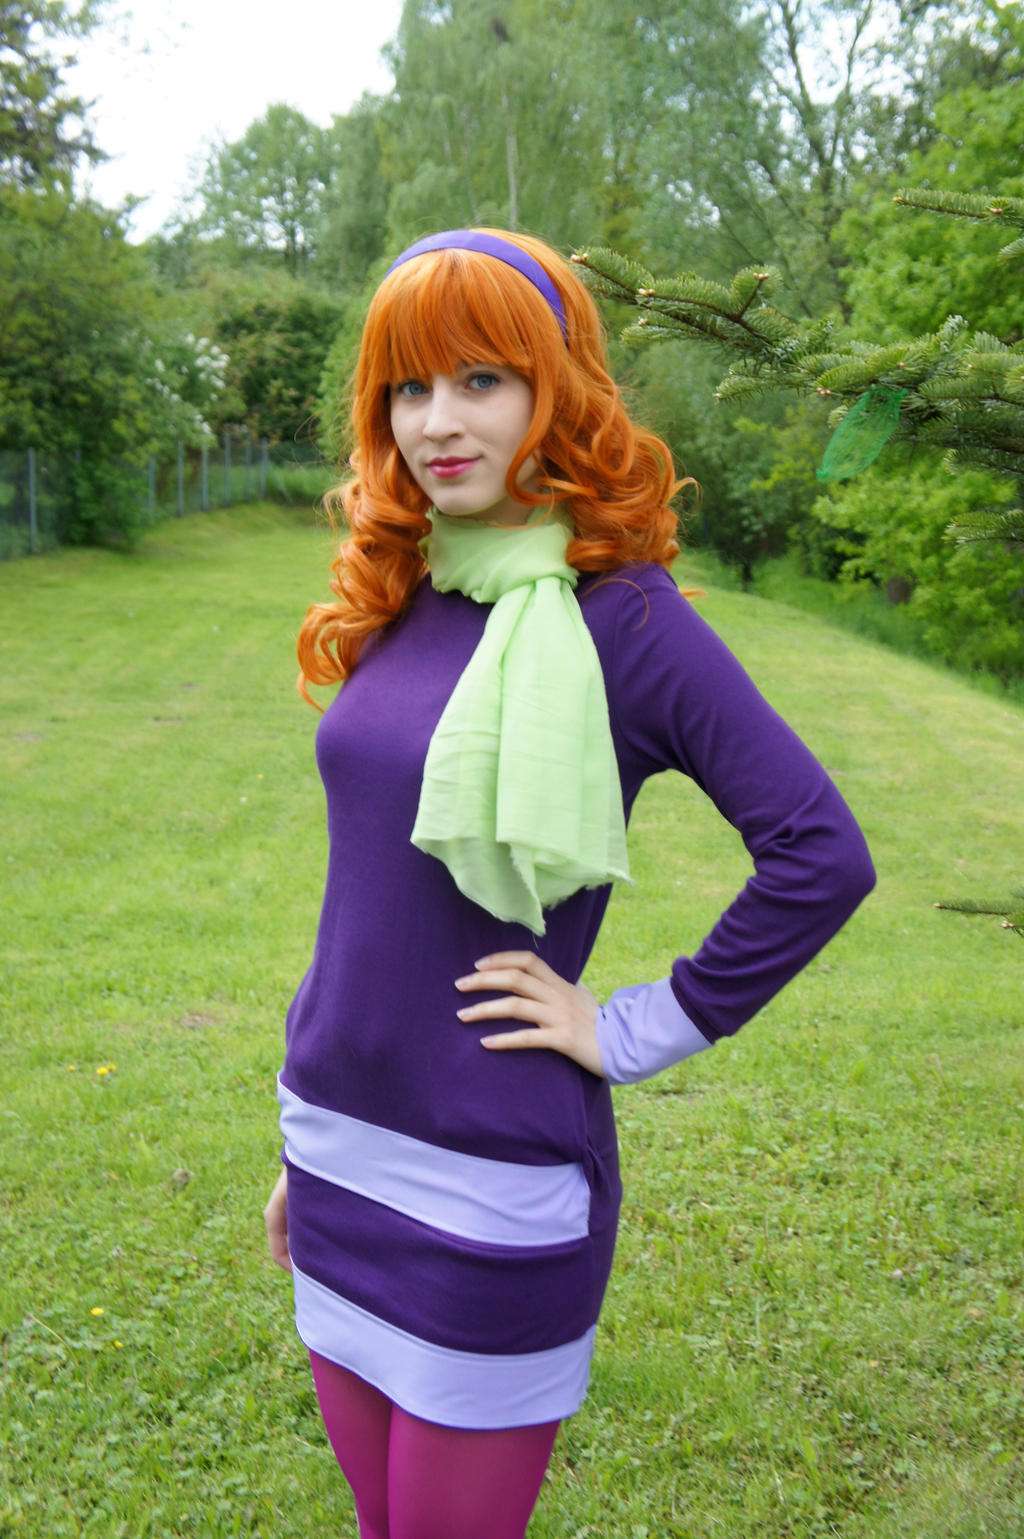 75+ Hot Pictures Of Daphne Blake From Scooby Doo Which Are Sure to ...